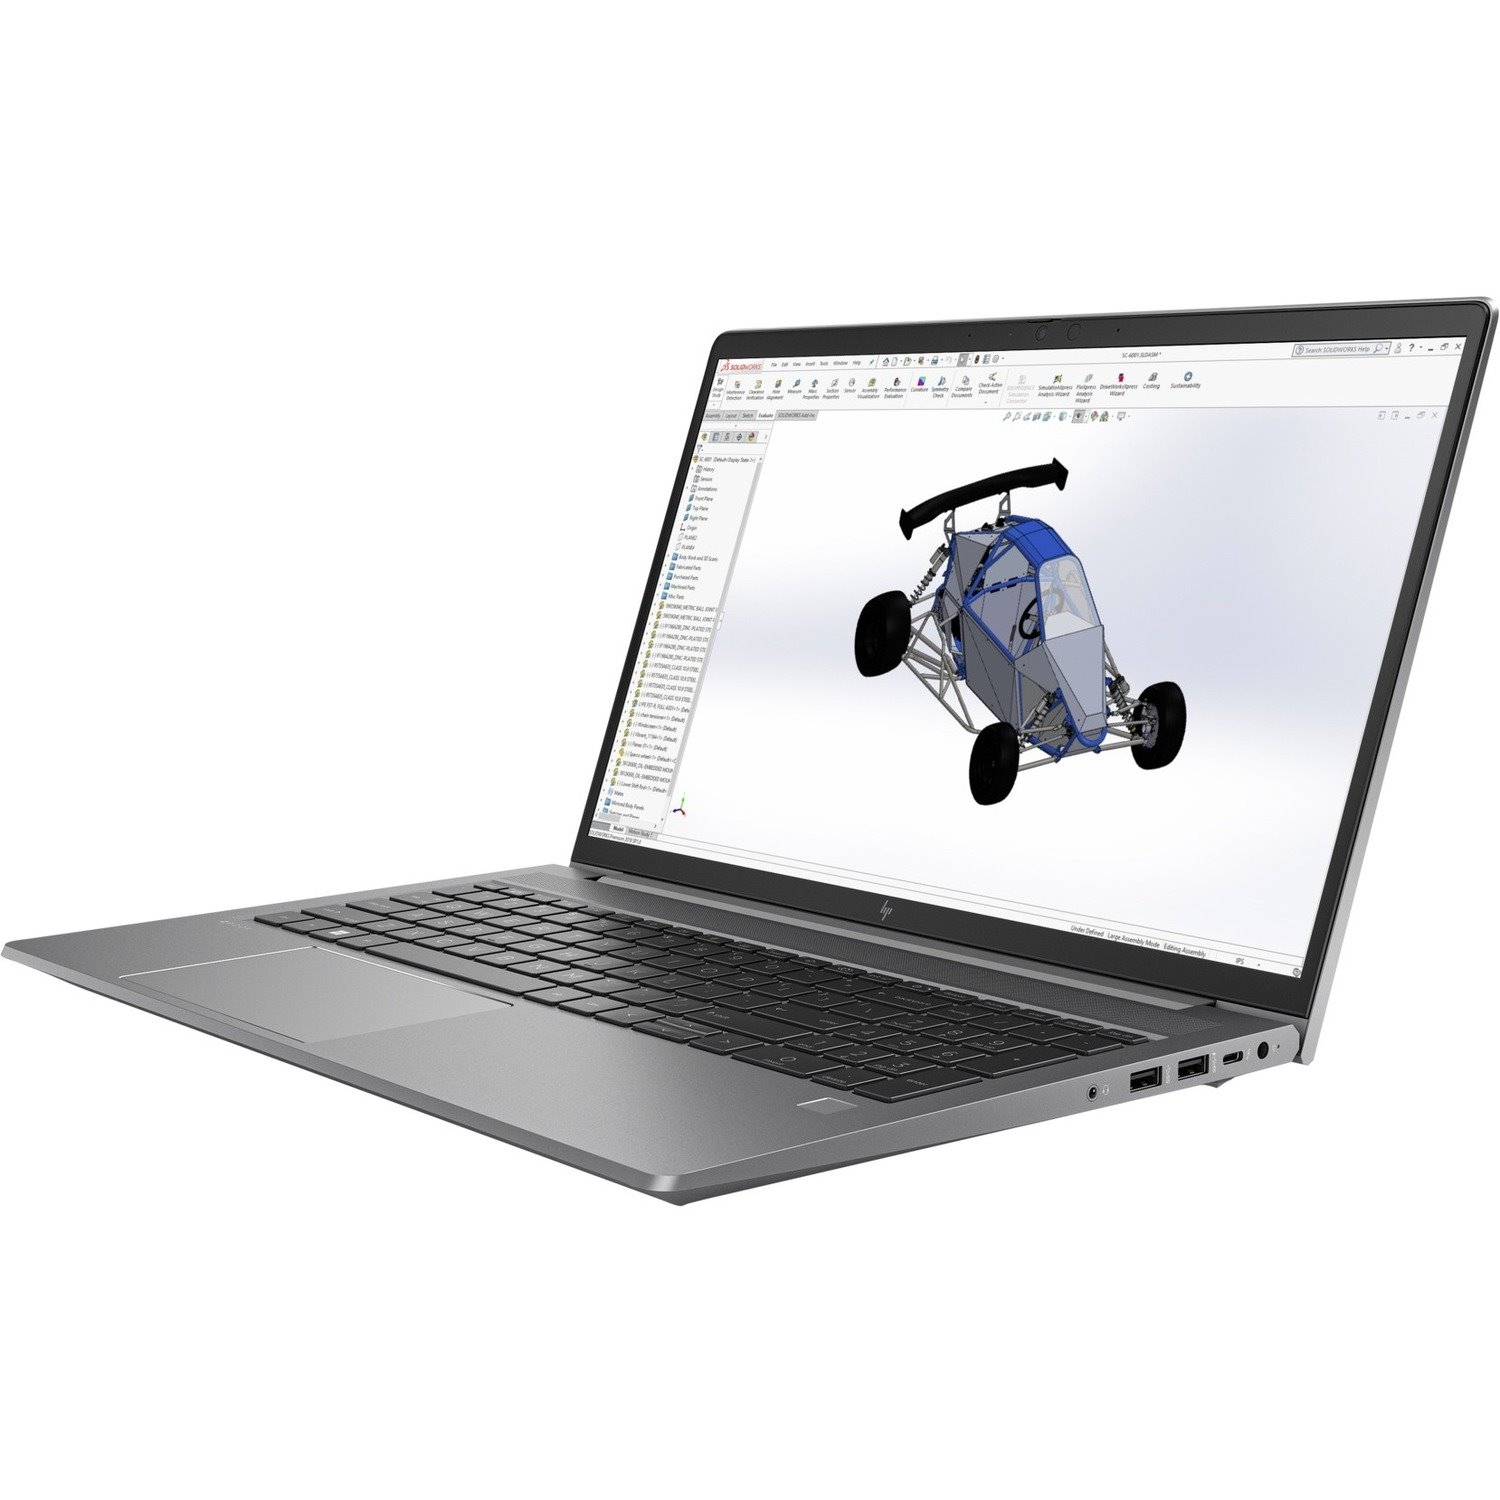 HP ZBook Power G9 15.6" Mobile Workstation - Full HD - 1920 x 1080 - Intel Core i7 12th Gen i7-12700H Tetradeca-core (14 Core) 2.30 GHz - 16 GB Total RAM - 512 GB SSD